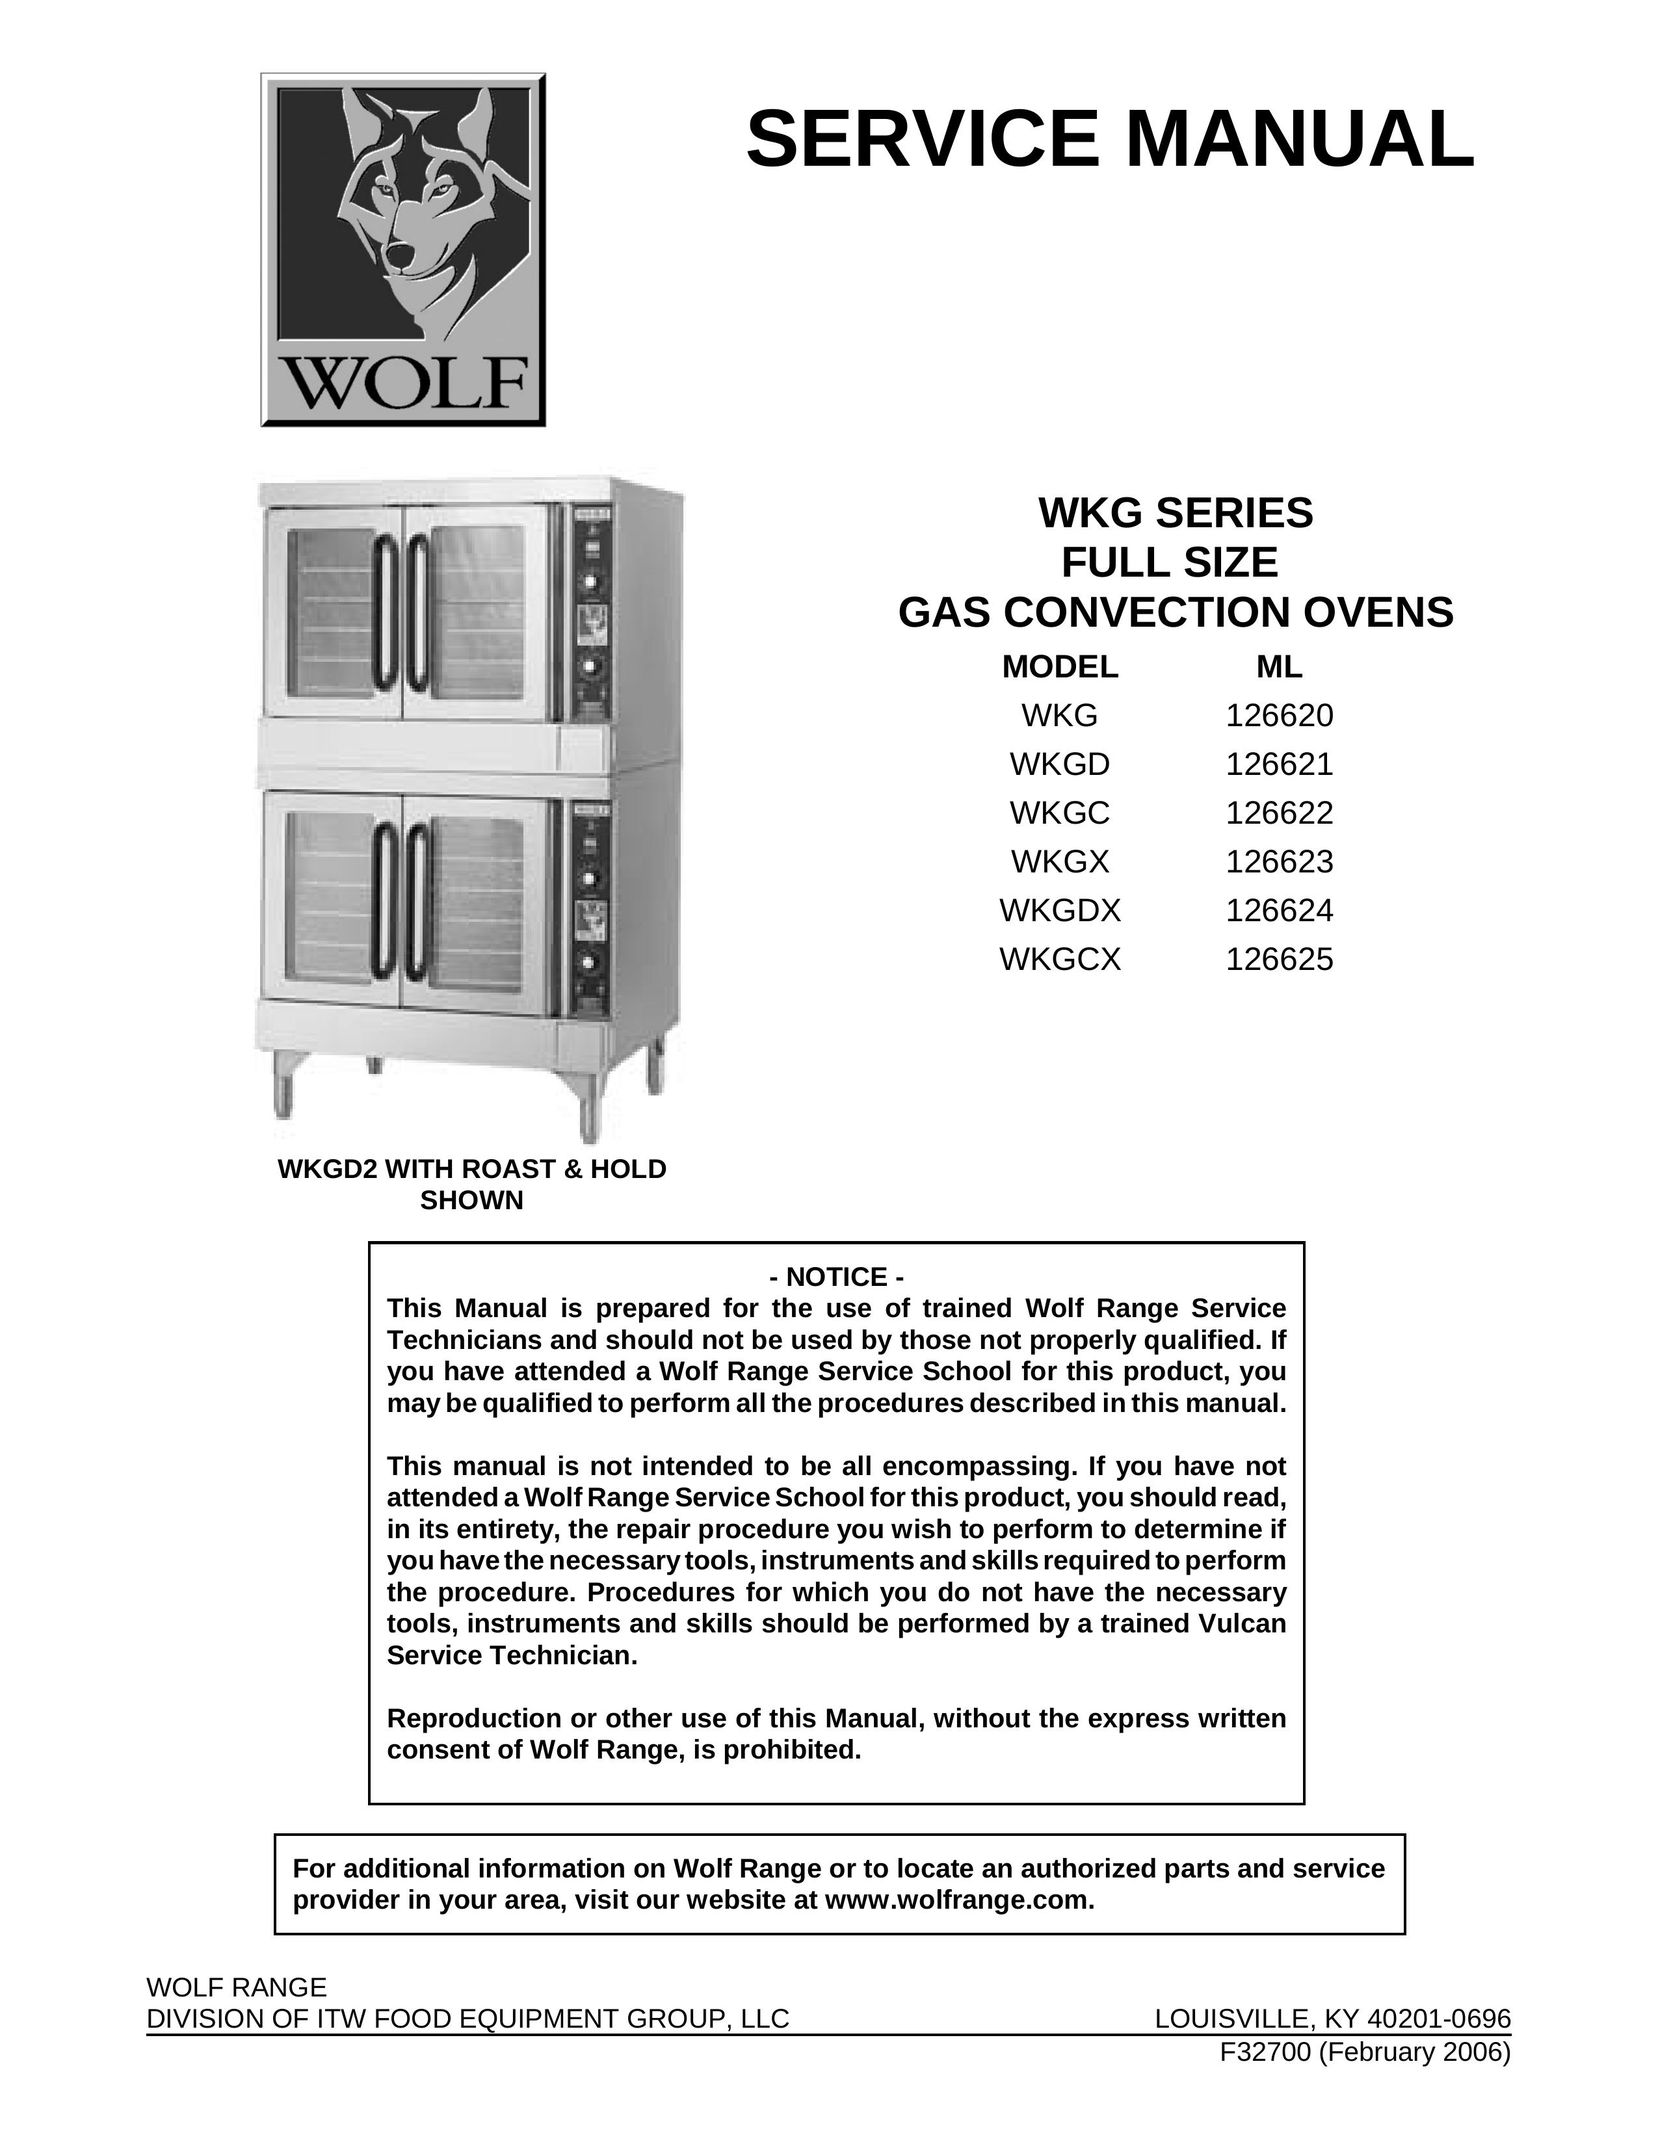 Wolf WKGCX 126625 Convection Oven User Manual